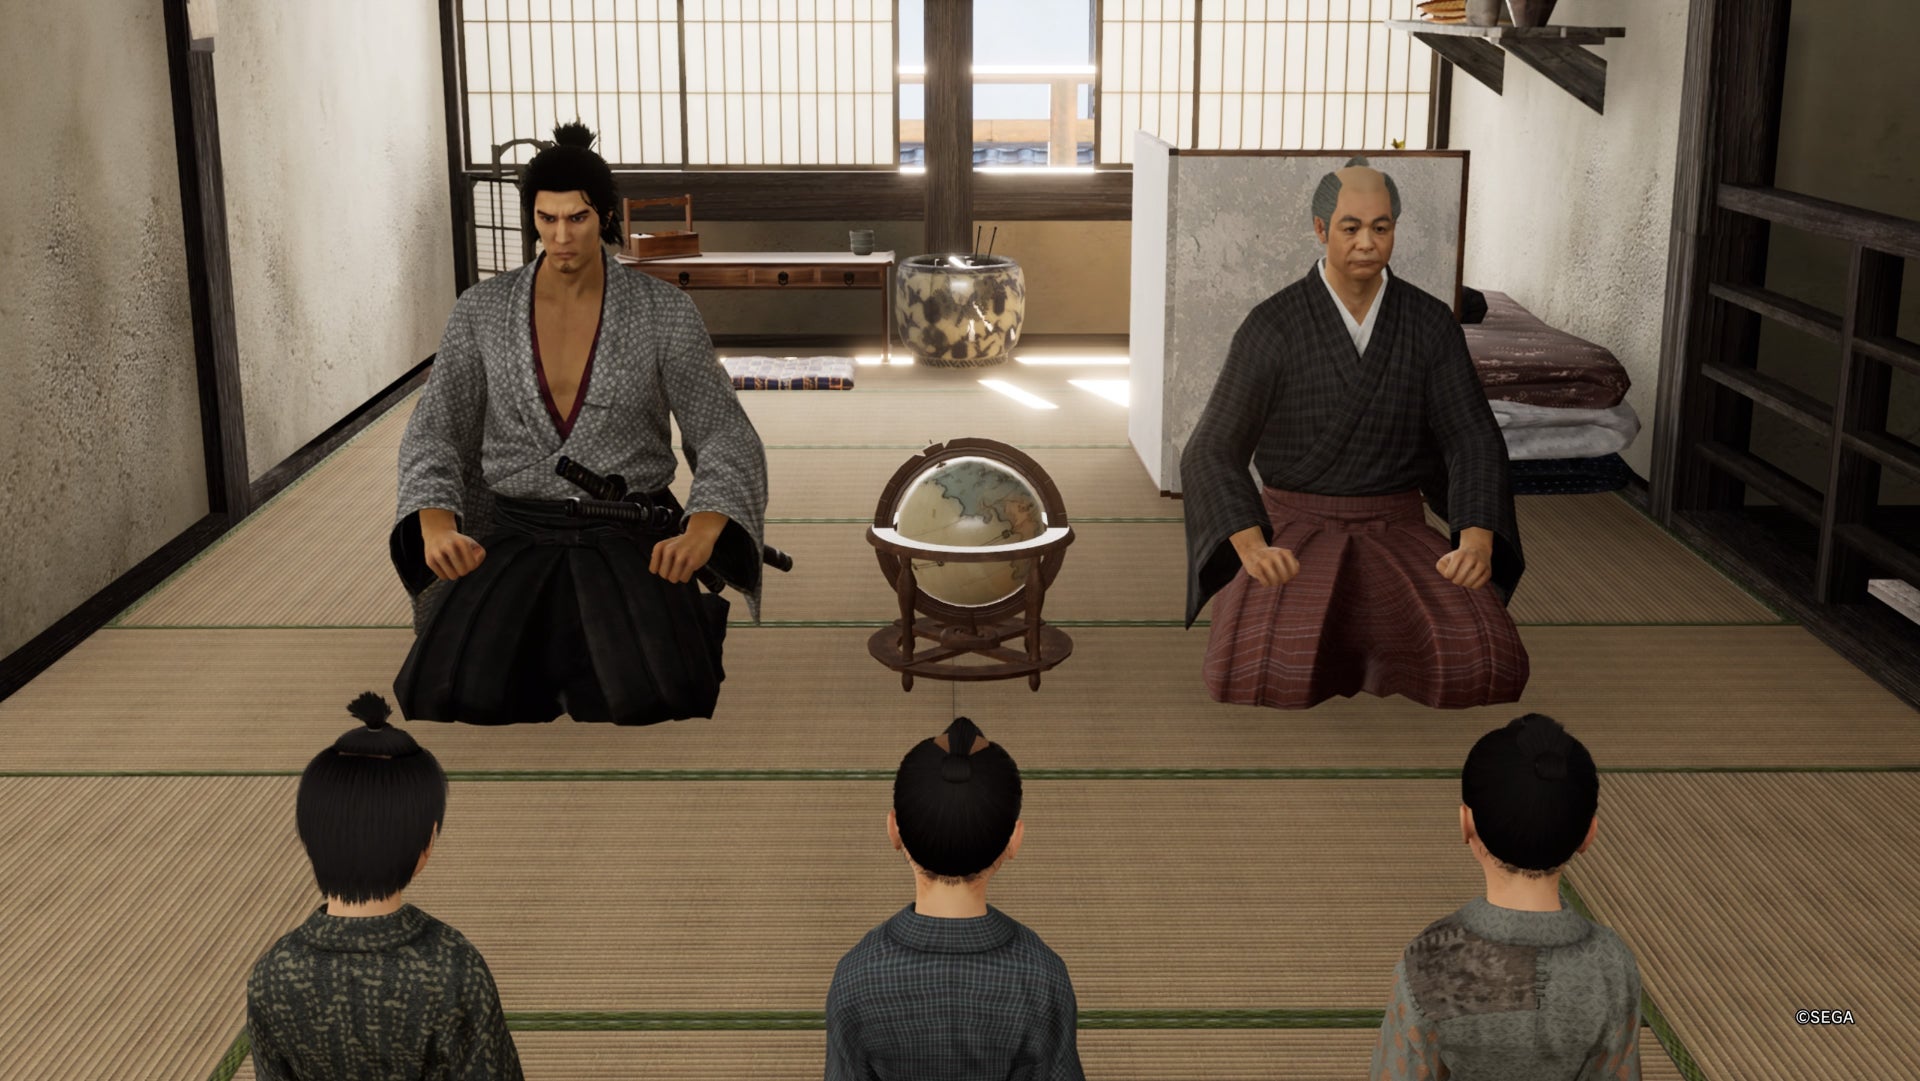 Like a Dragon Ishin, Ryoma is in a classroom with a Globe, a school teacher and three students